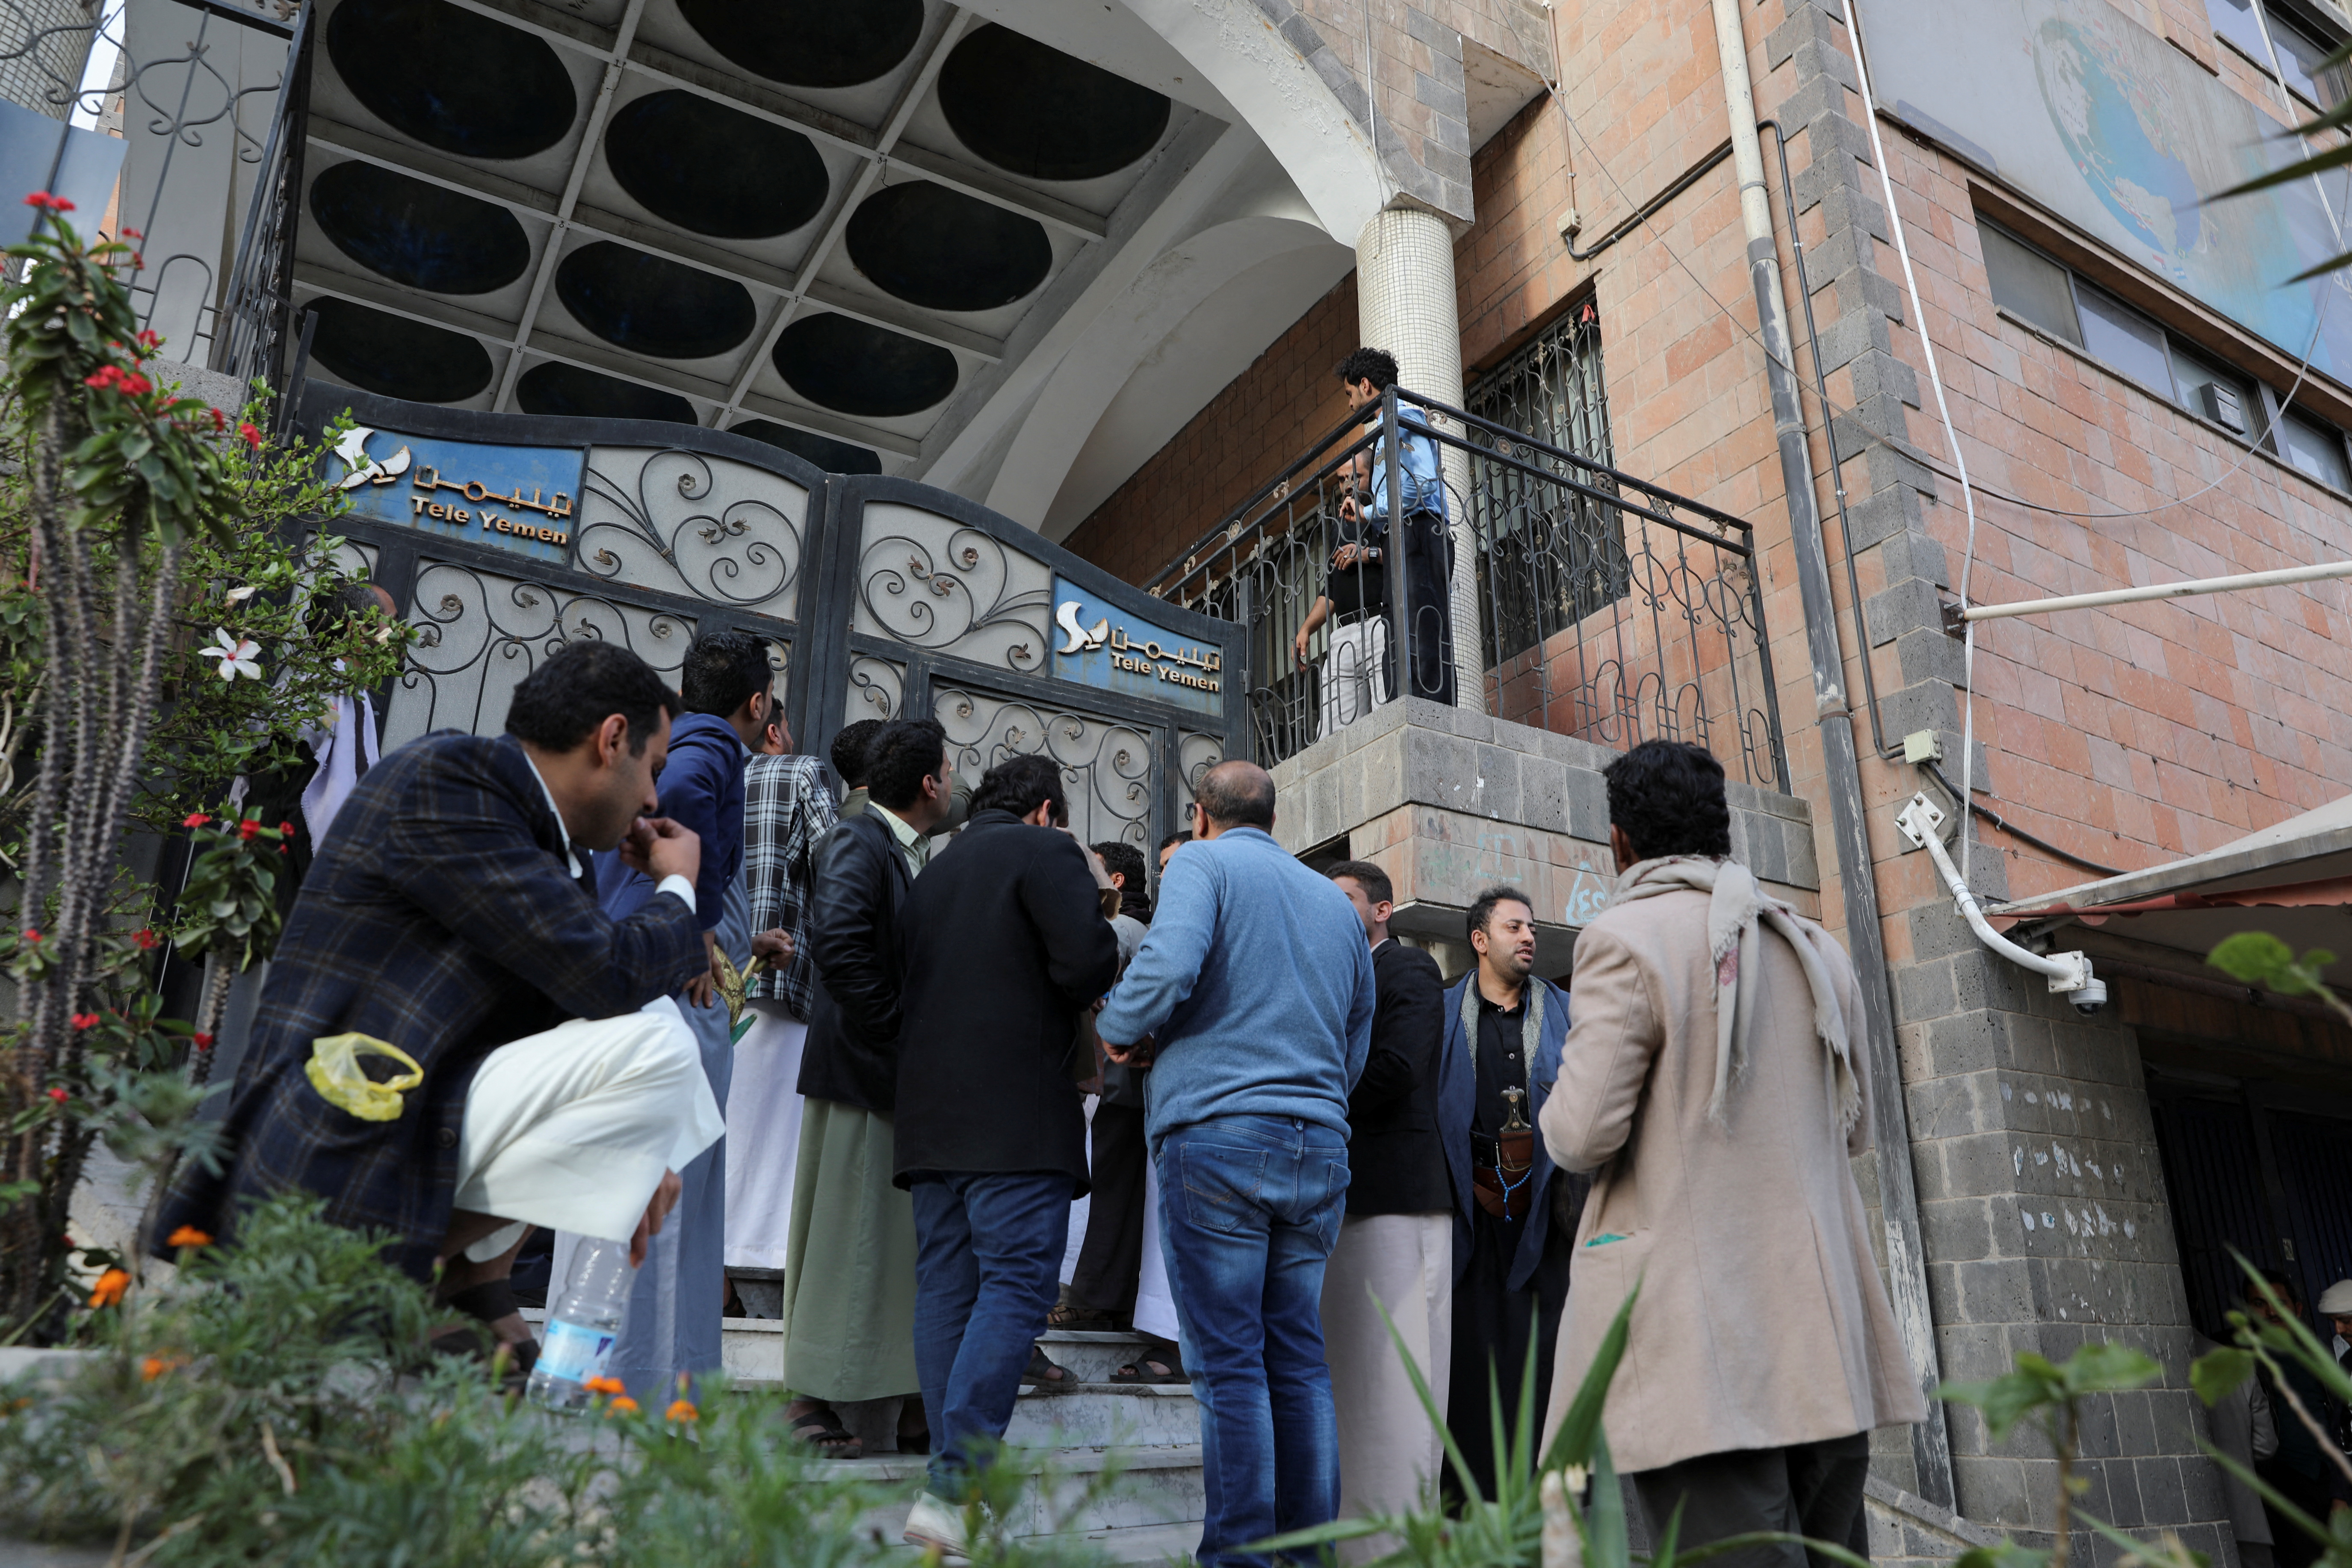 People wait outside TeleYemen company to get satellite internet connection amid an outage of internet service in Sanaa